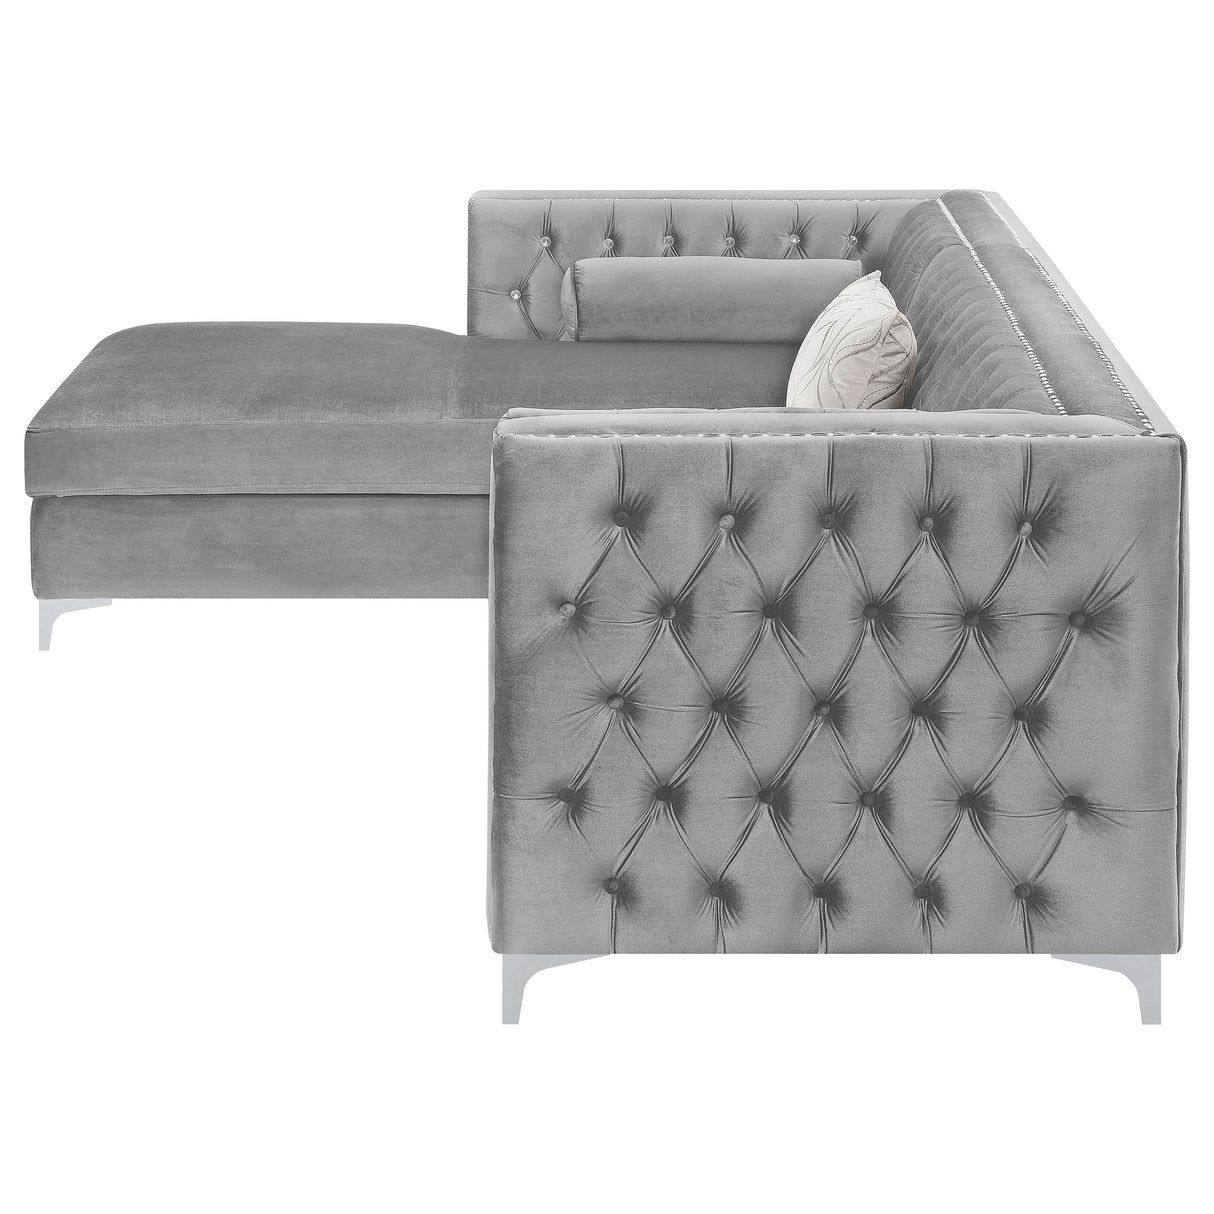 Sectional - Bellaire Button-tufted Upholstered Sectional Silver